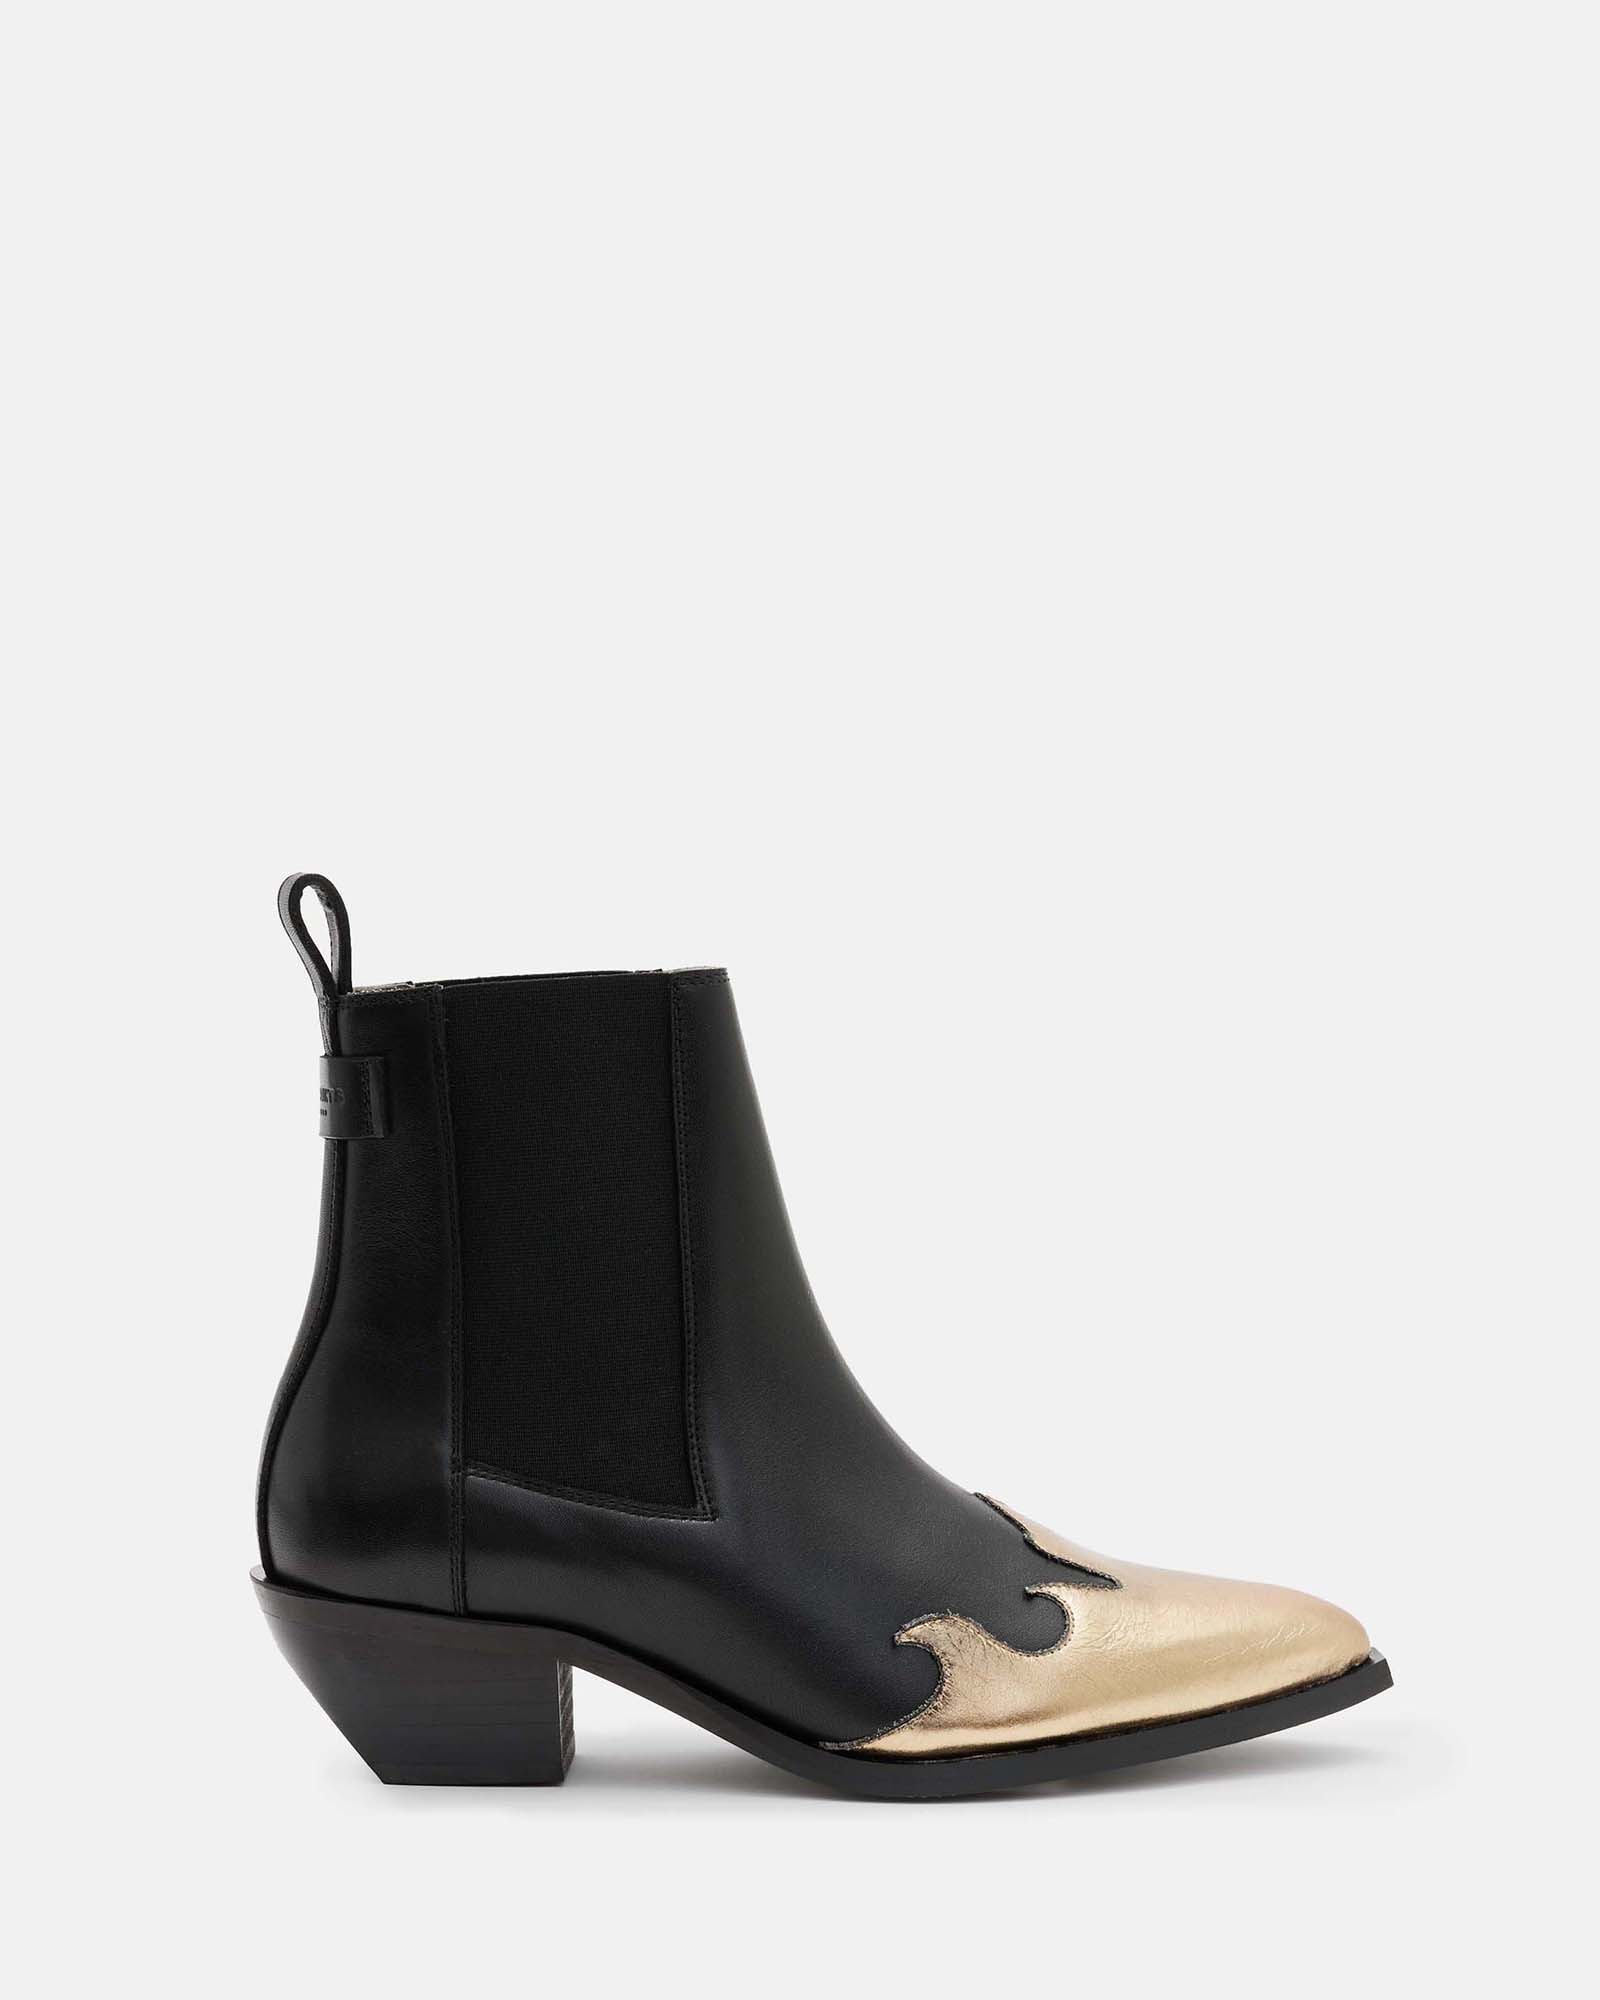 AllSaints Dellaware Pointed Leather Western Boots